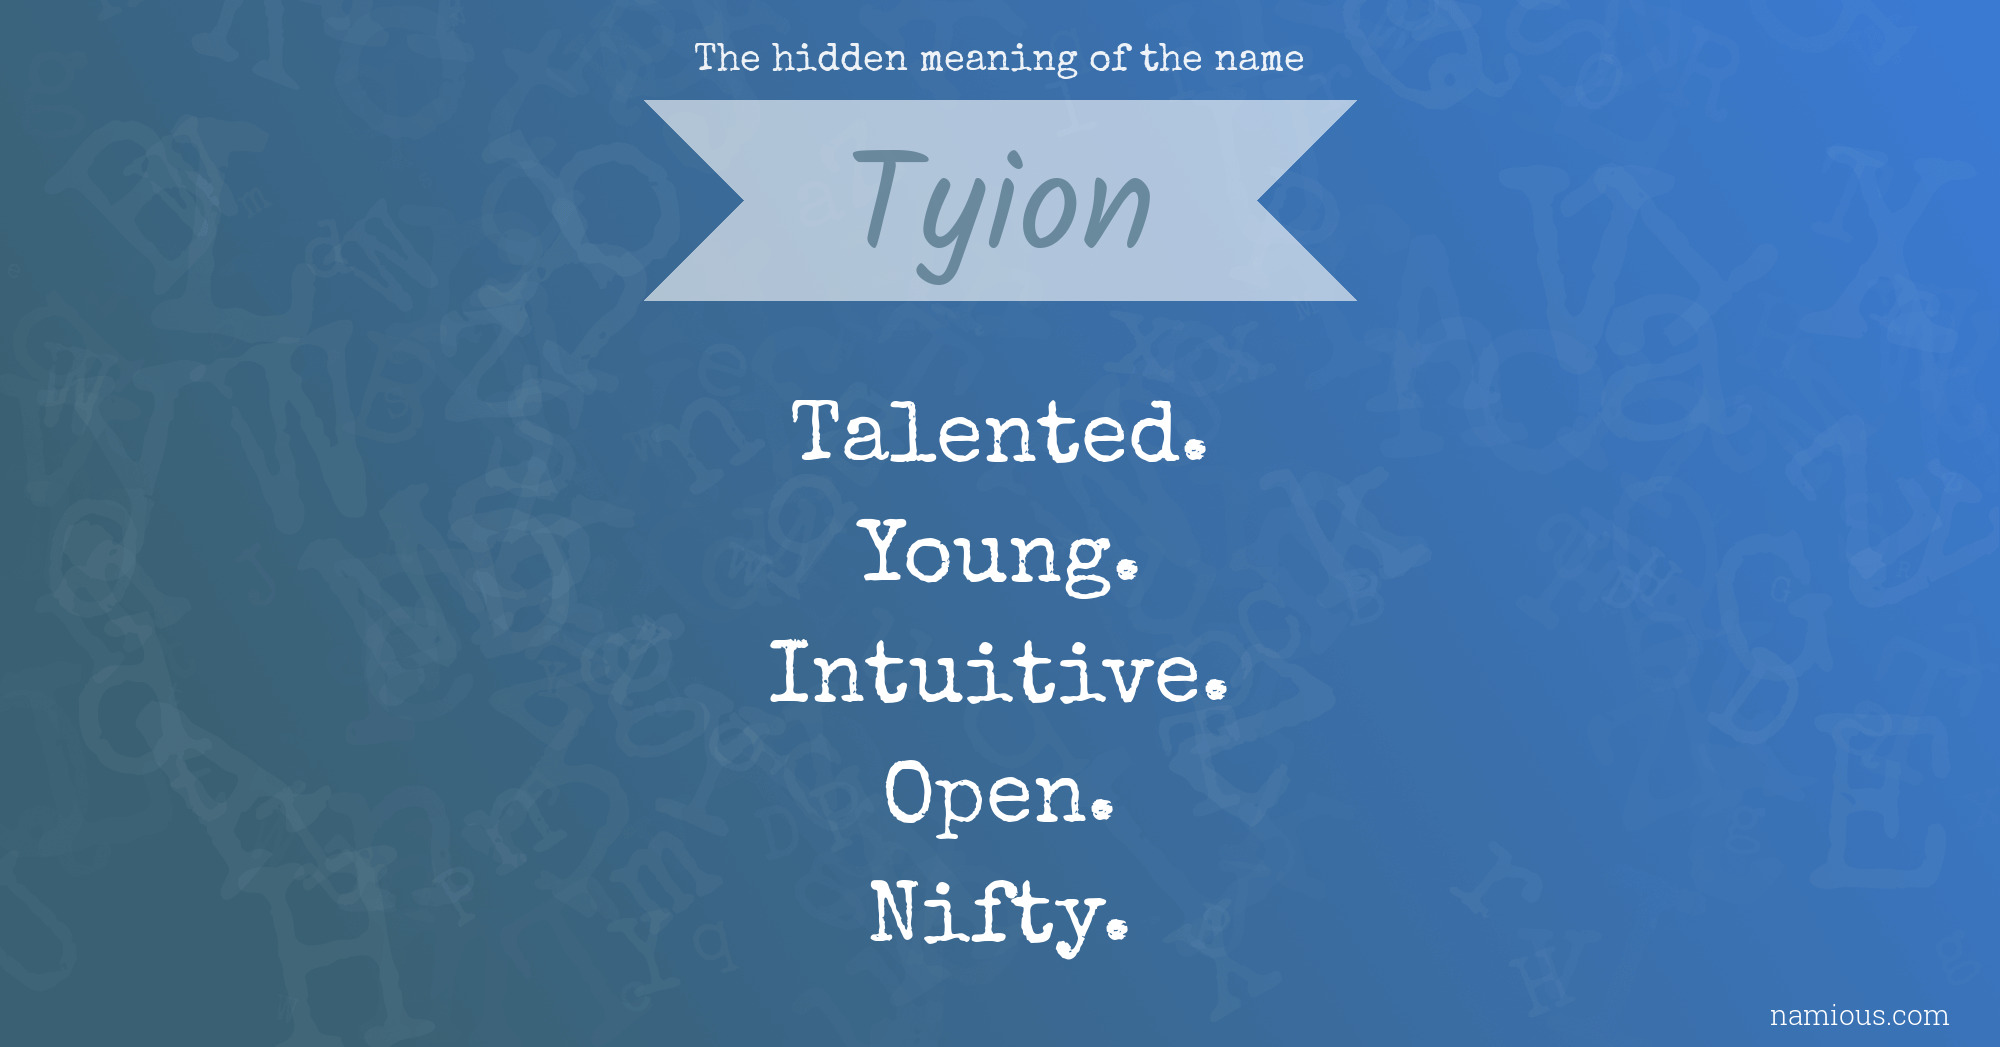 The hidden meaning of the name Tyion